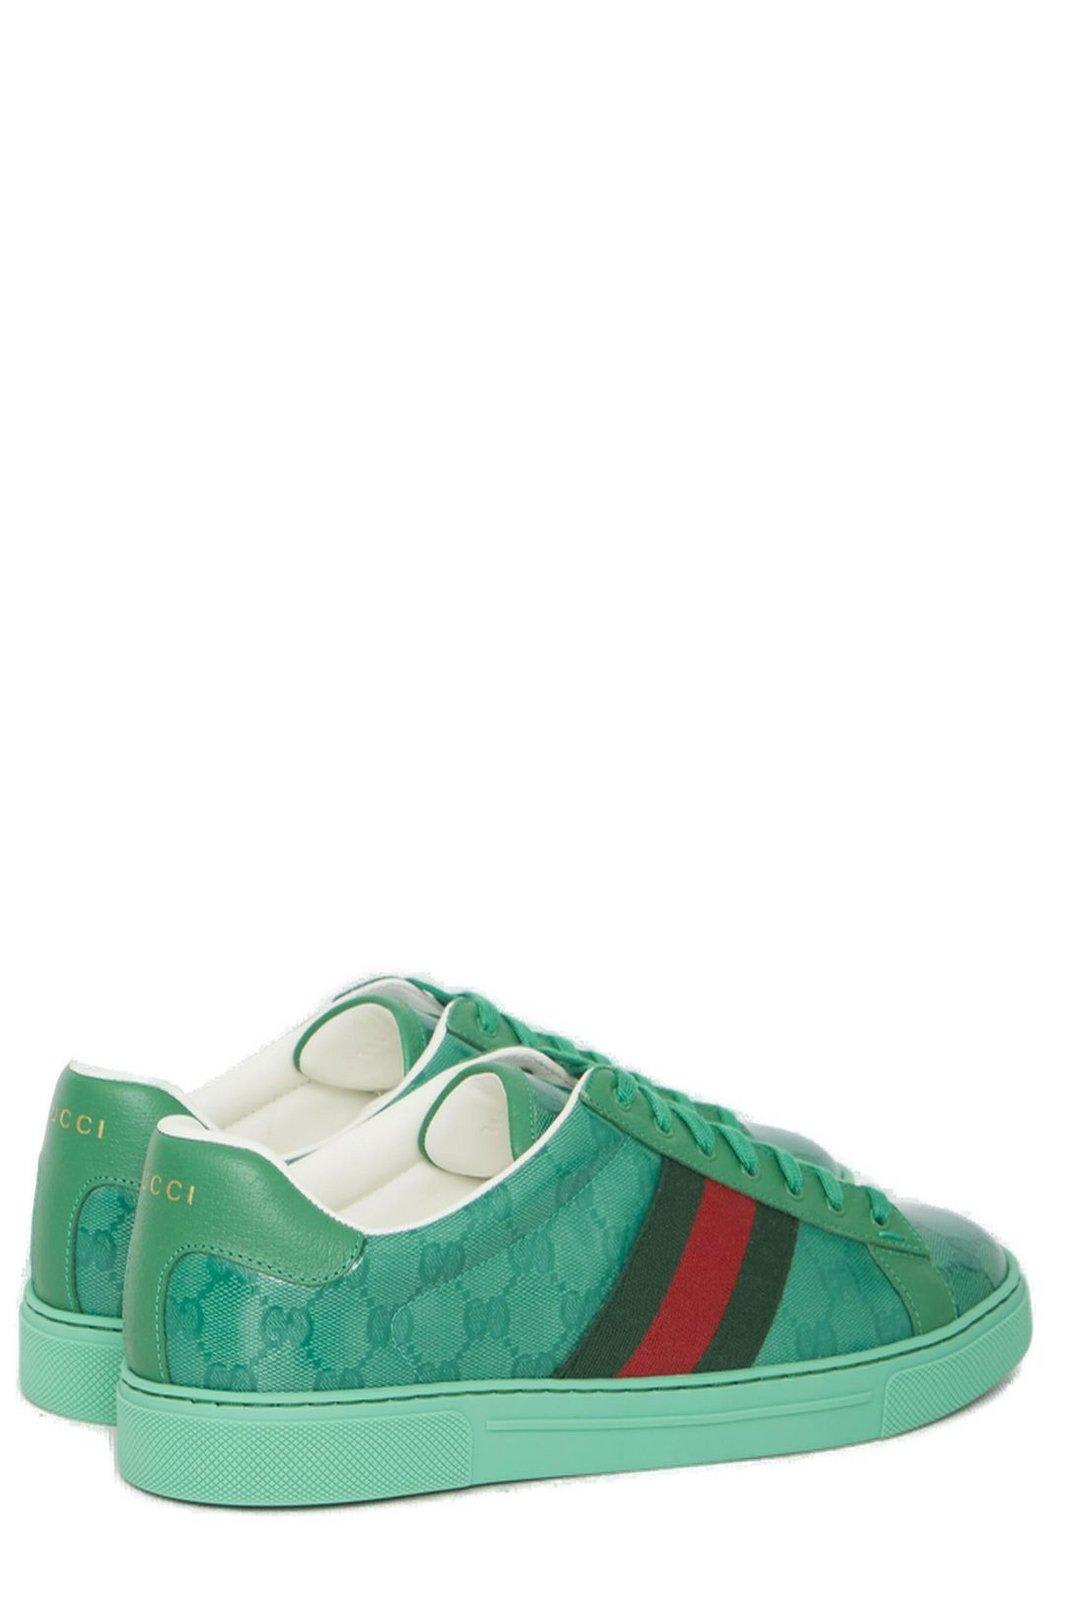 Shop Gucci Ace Gg Embellished Sneakers In Green